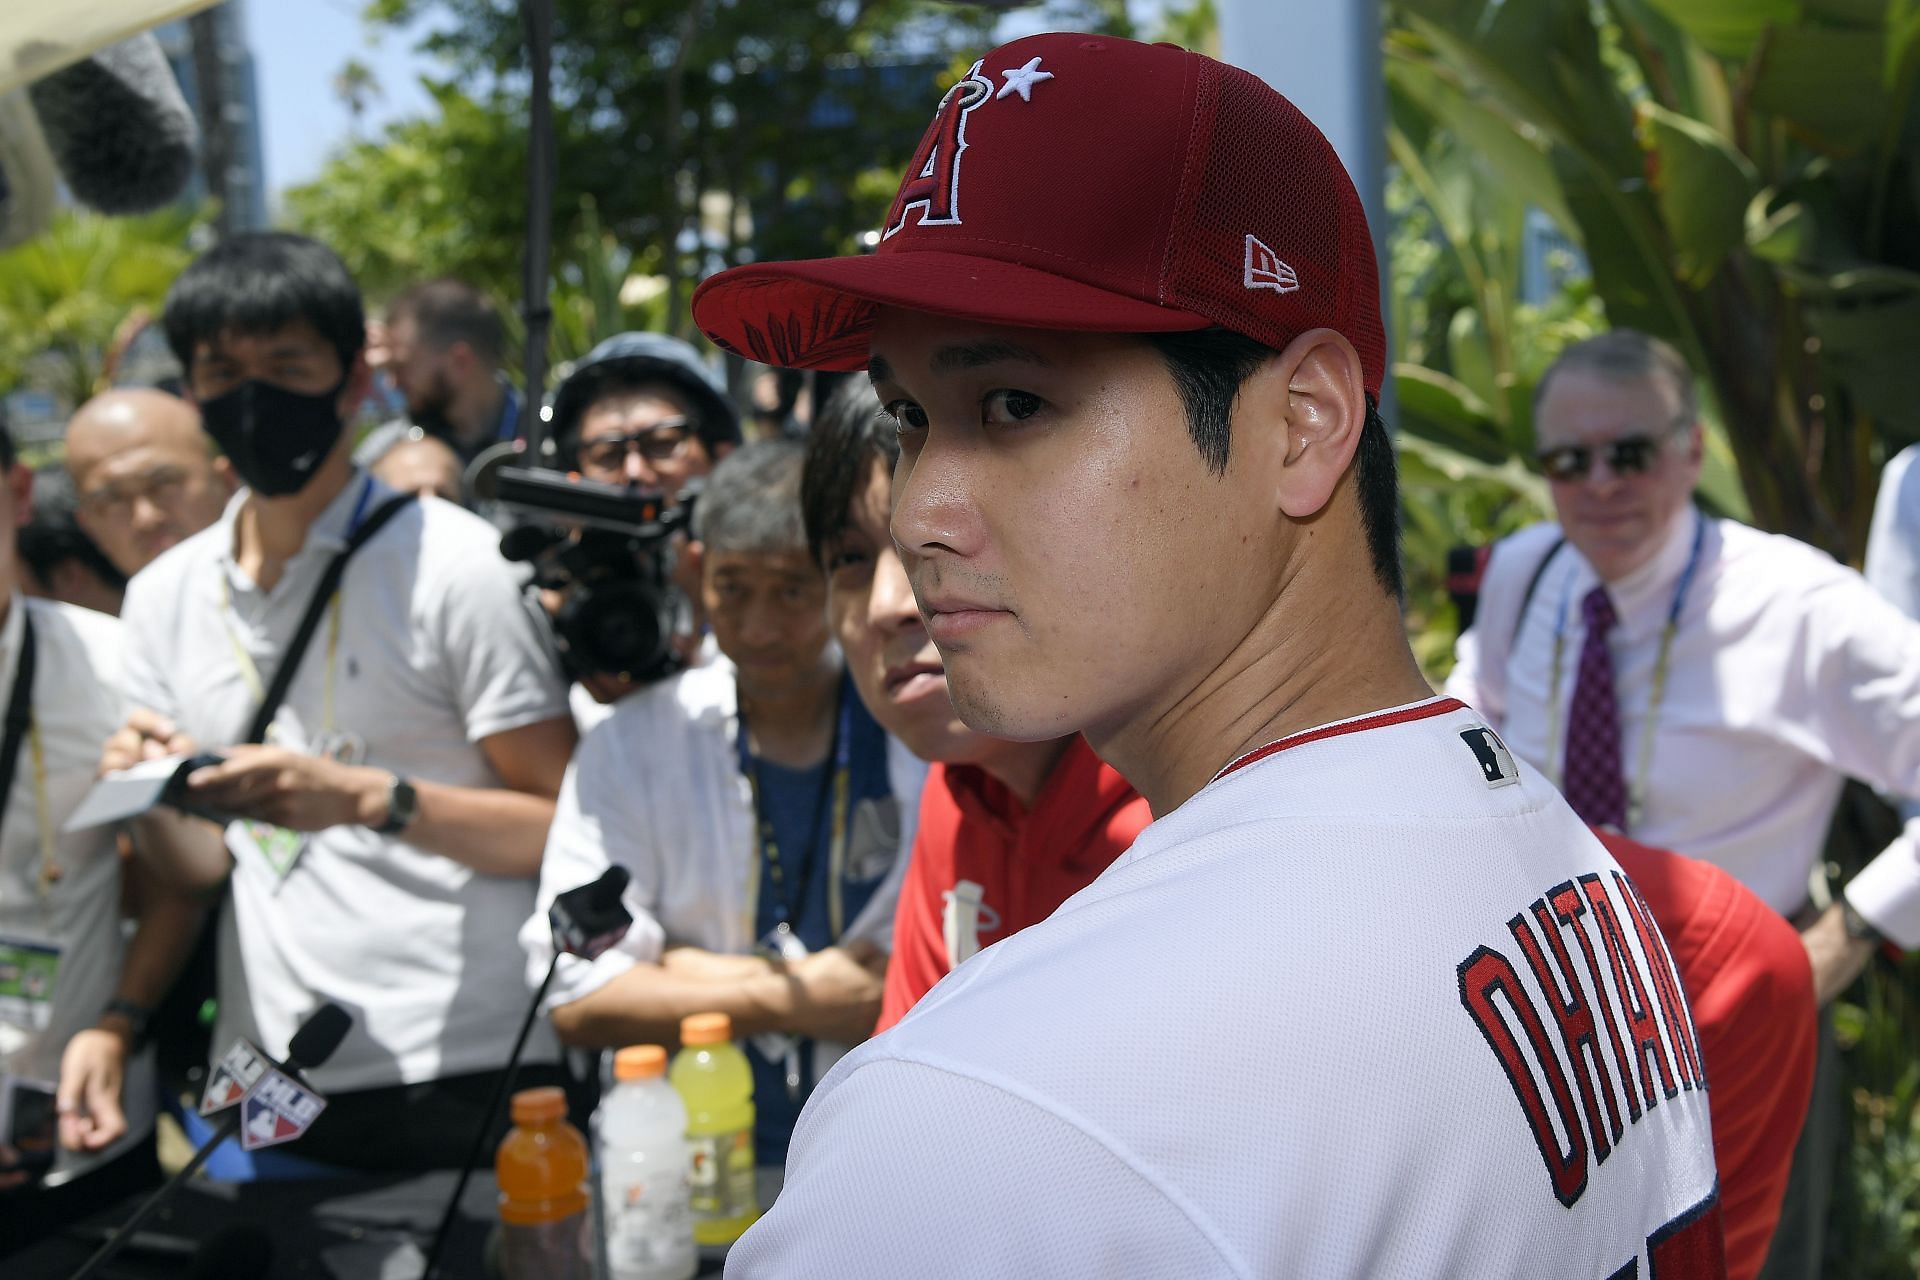 Shohei Ohtani talking to the press during the 2022 Gatorade All-Star Workout Day